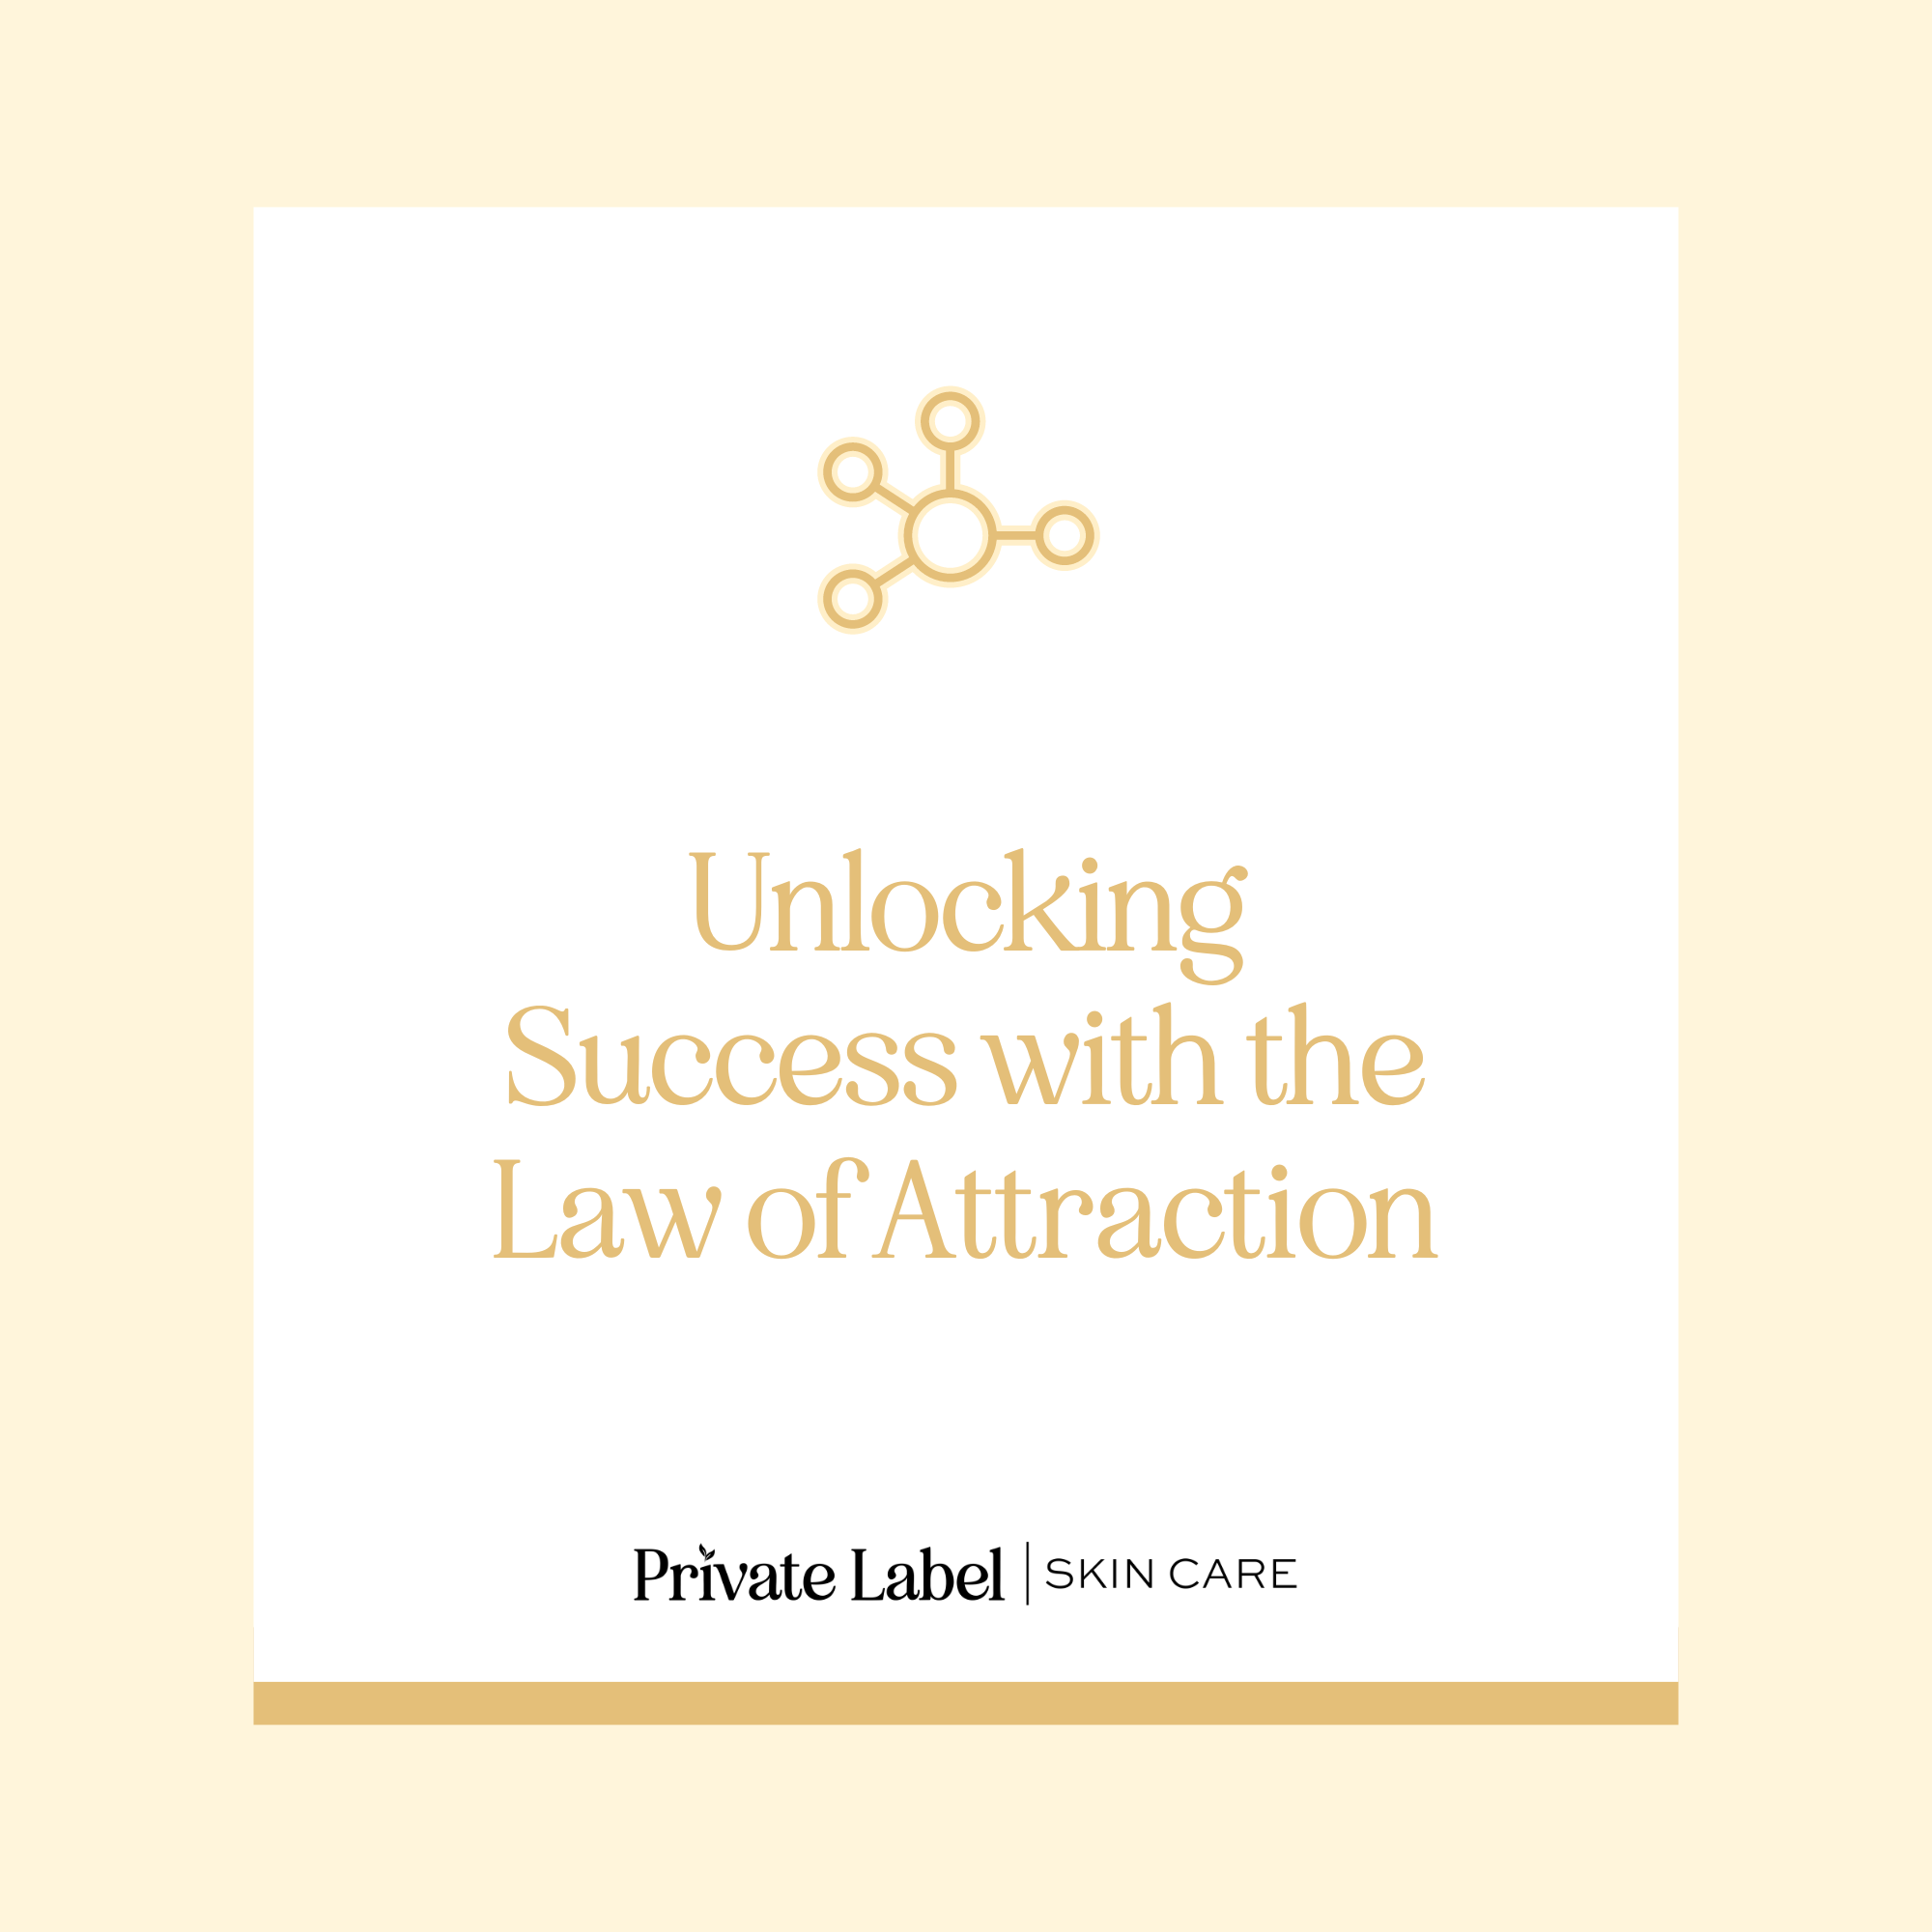 Unlocking Success with the Law of Attraction